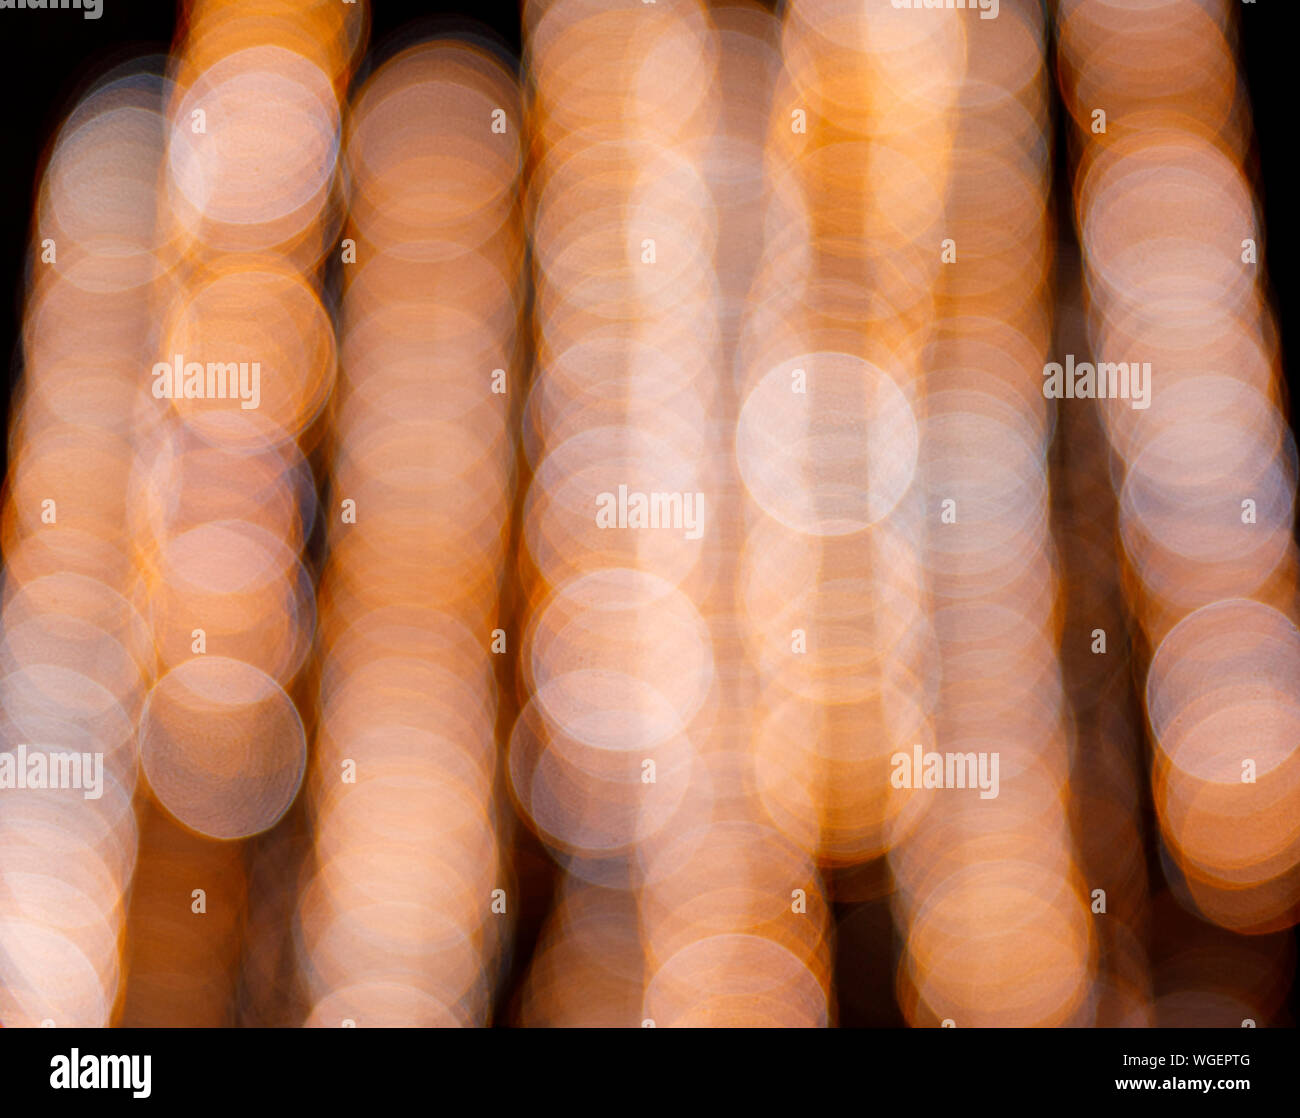 Abstract background with bokeh or blurry round colorful light bubbles Stock Photo